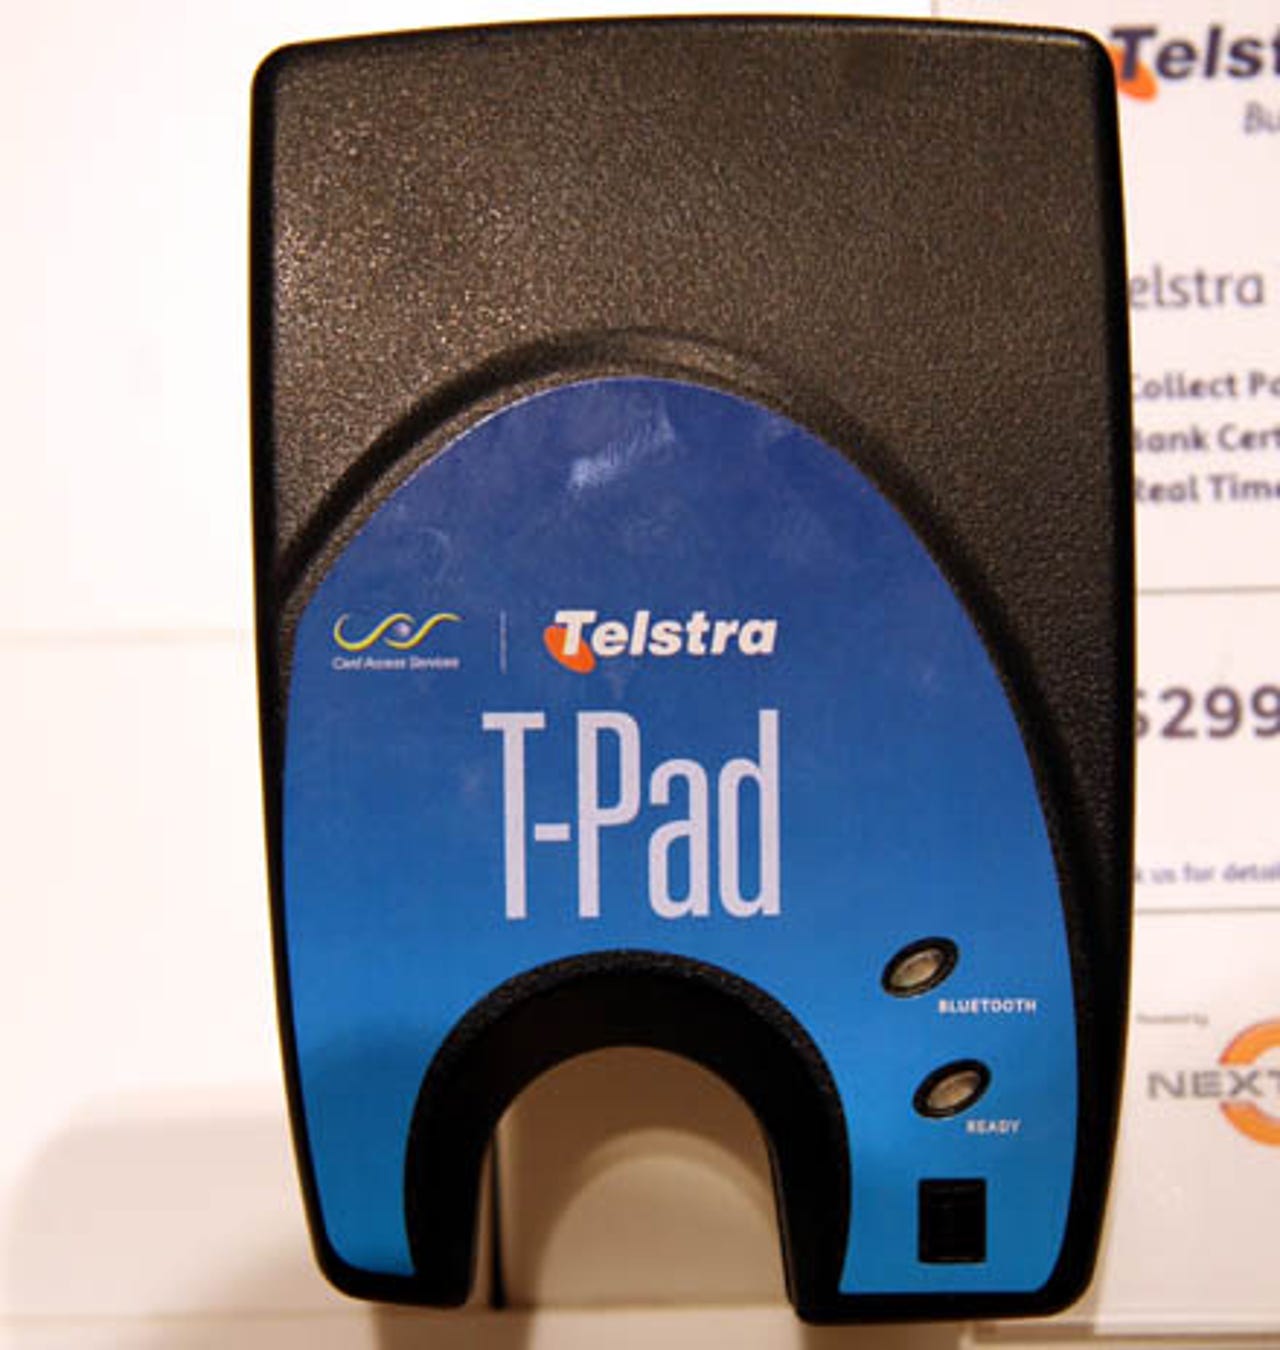 photos-telstra-launches-tlife-concept-store19.jpg